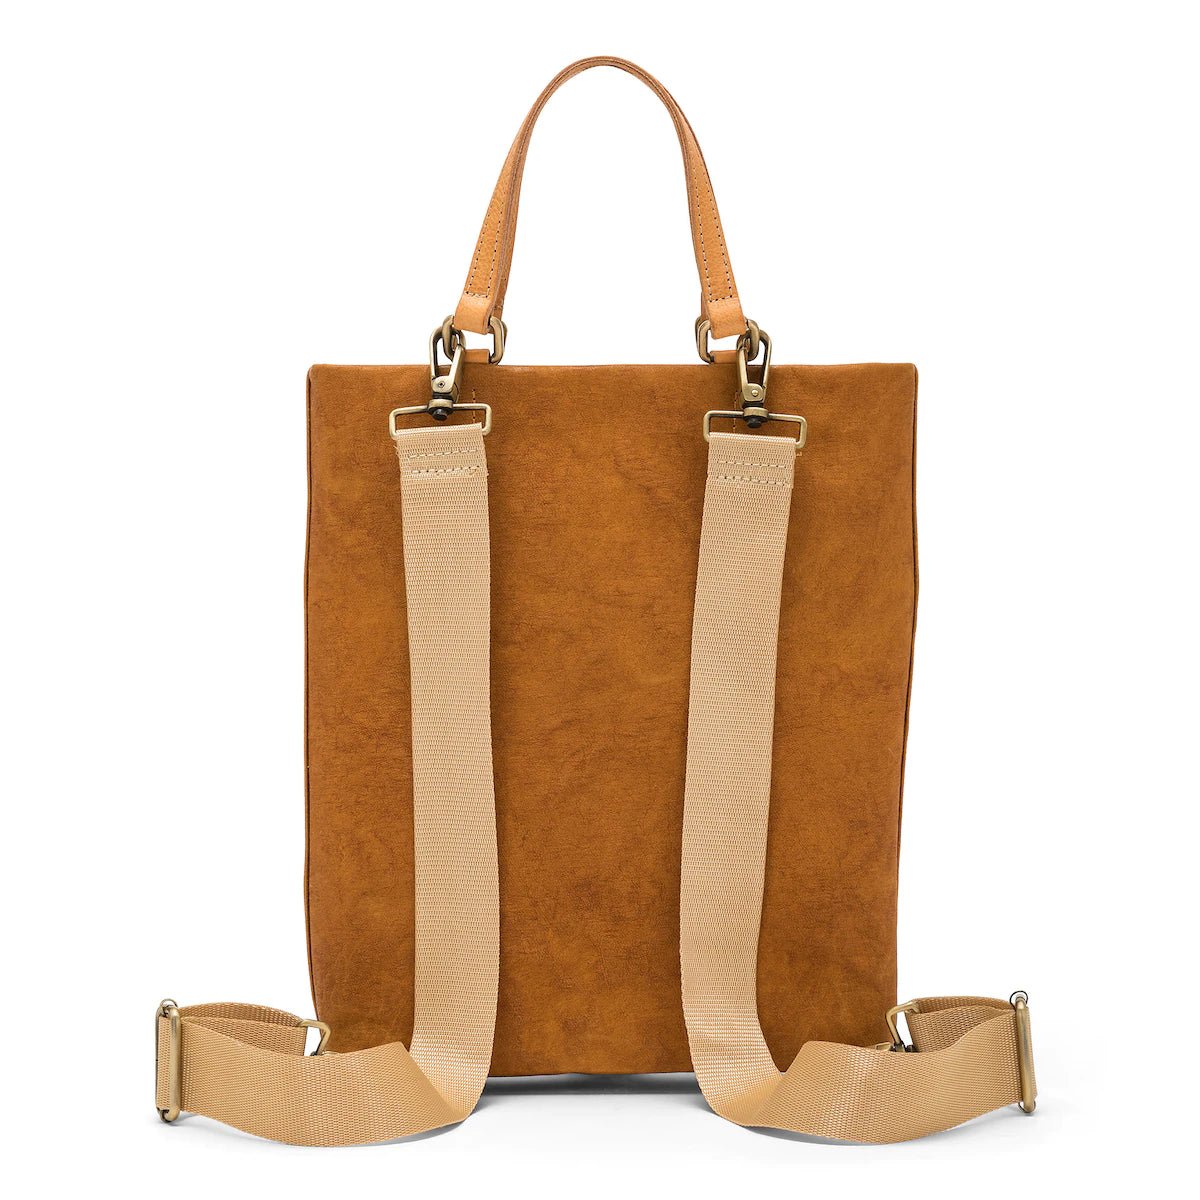 A rectangular tote bag backpack is shown from the back angle. It features two top tote handles, and two adjustable canvas shoulder straps. It is bright tan in colour.